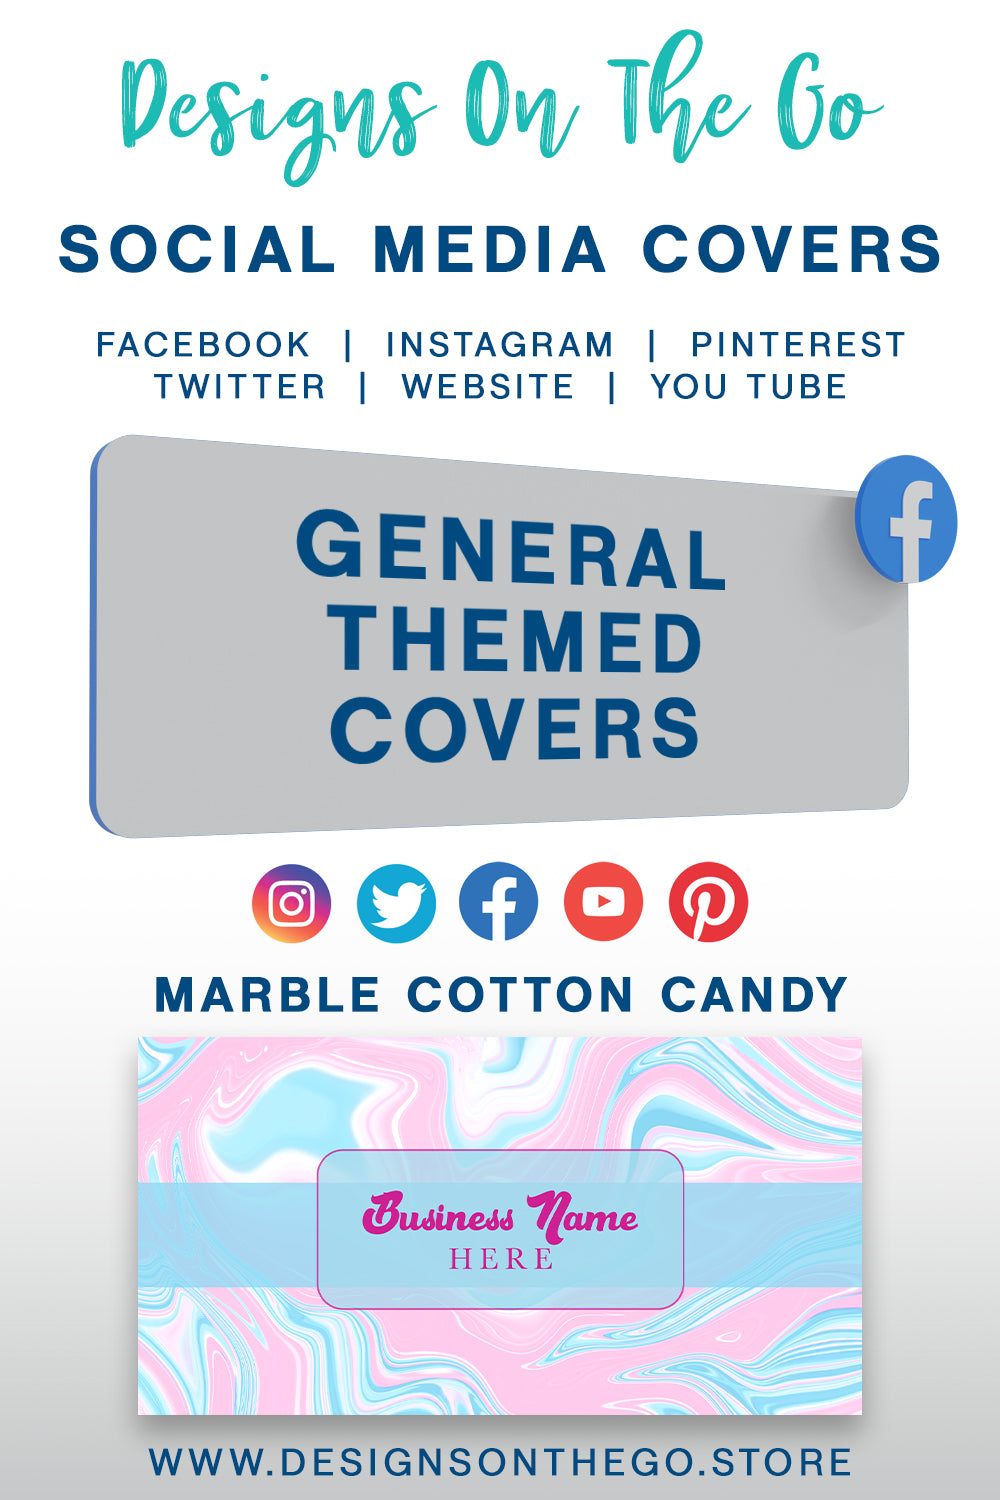 General Themed Social Media Covers